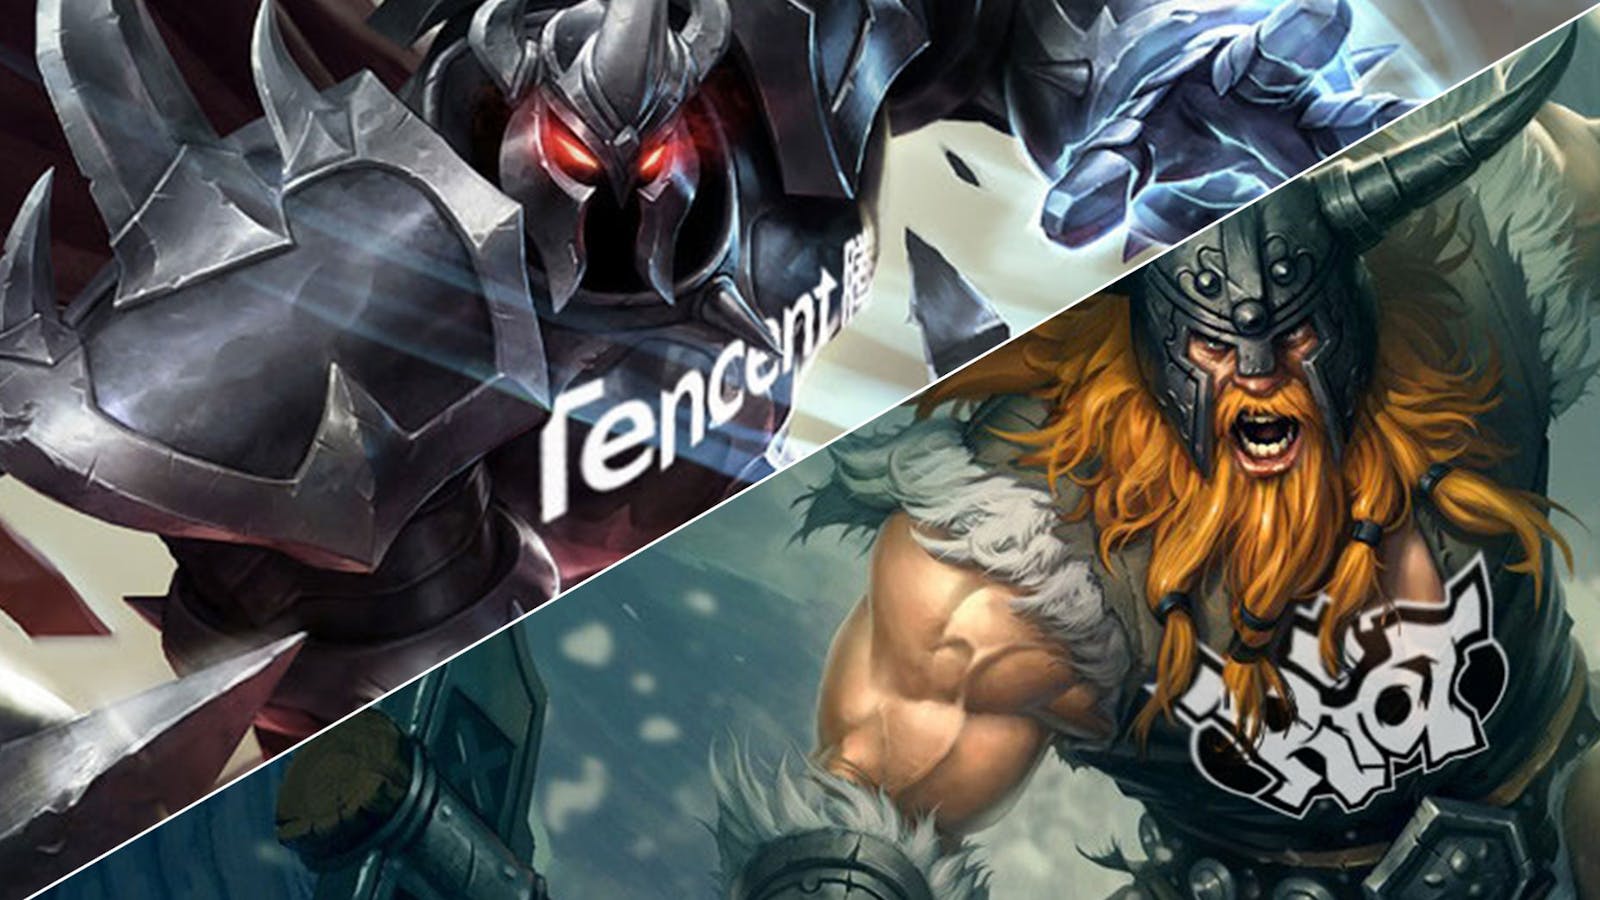 Tencent opens registration for Street Fighter Mobile in China